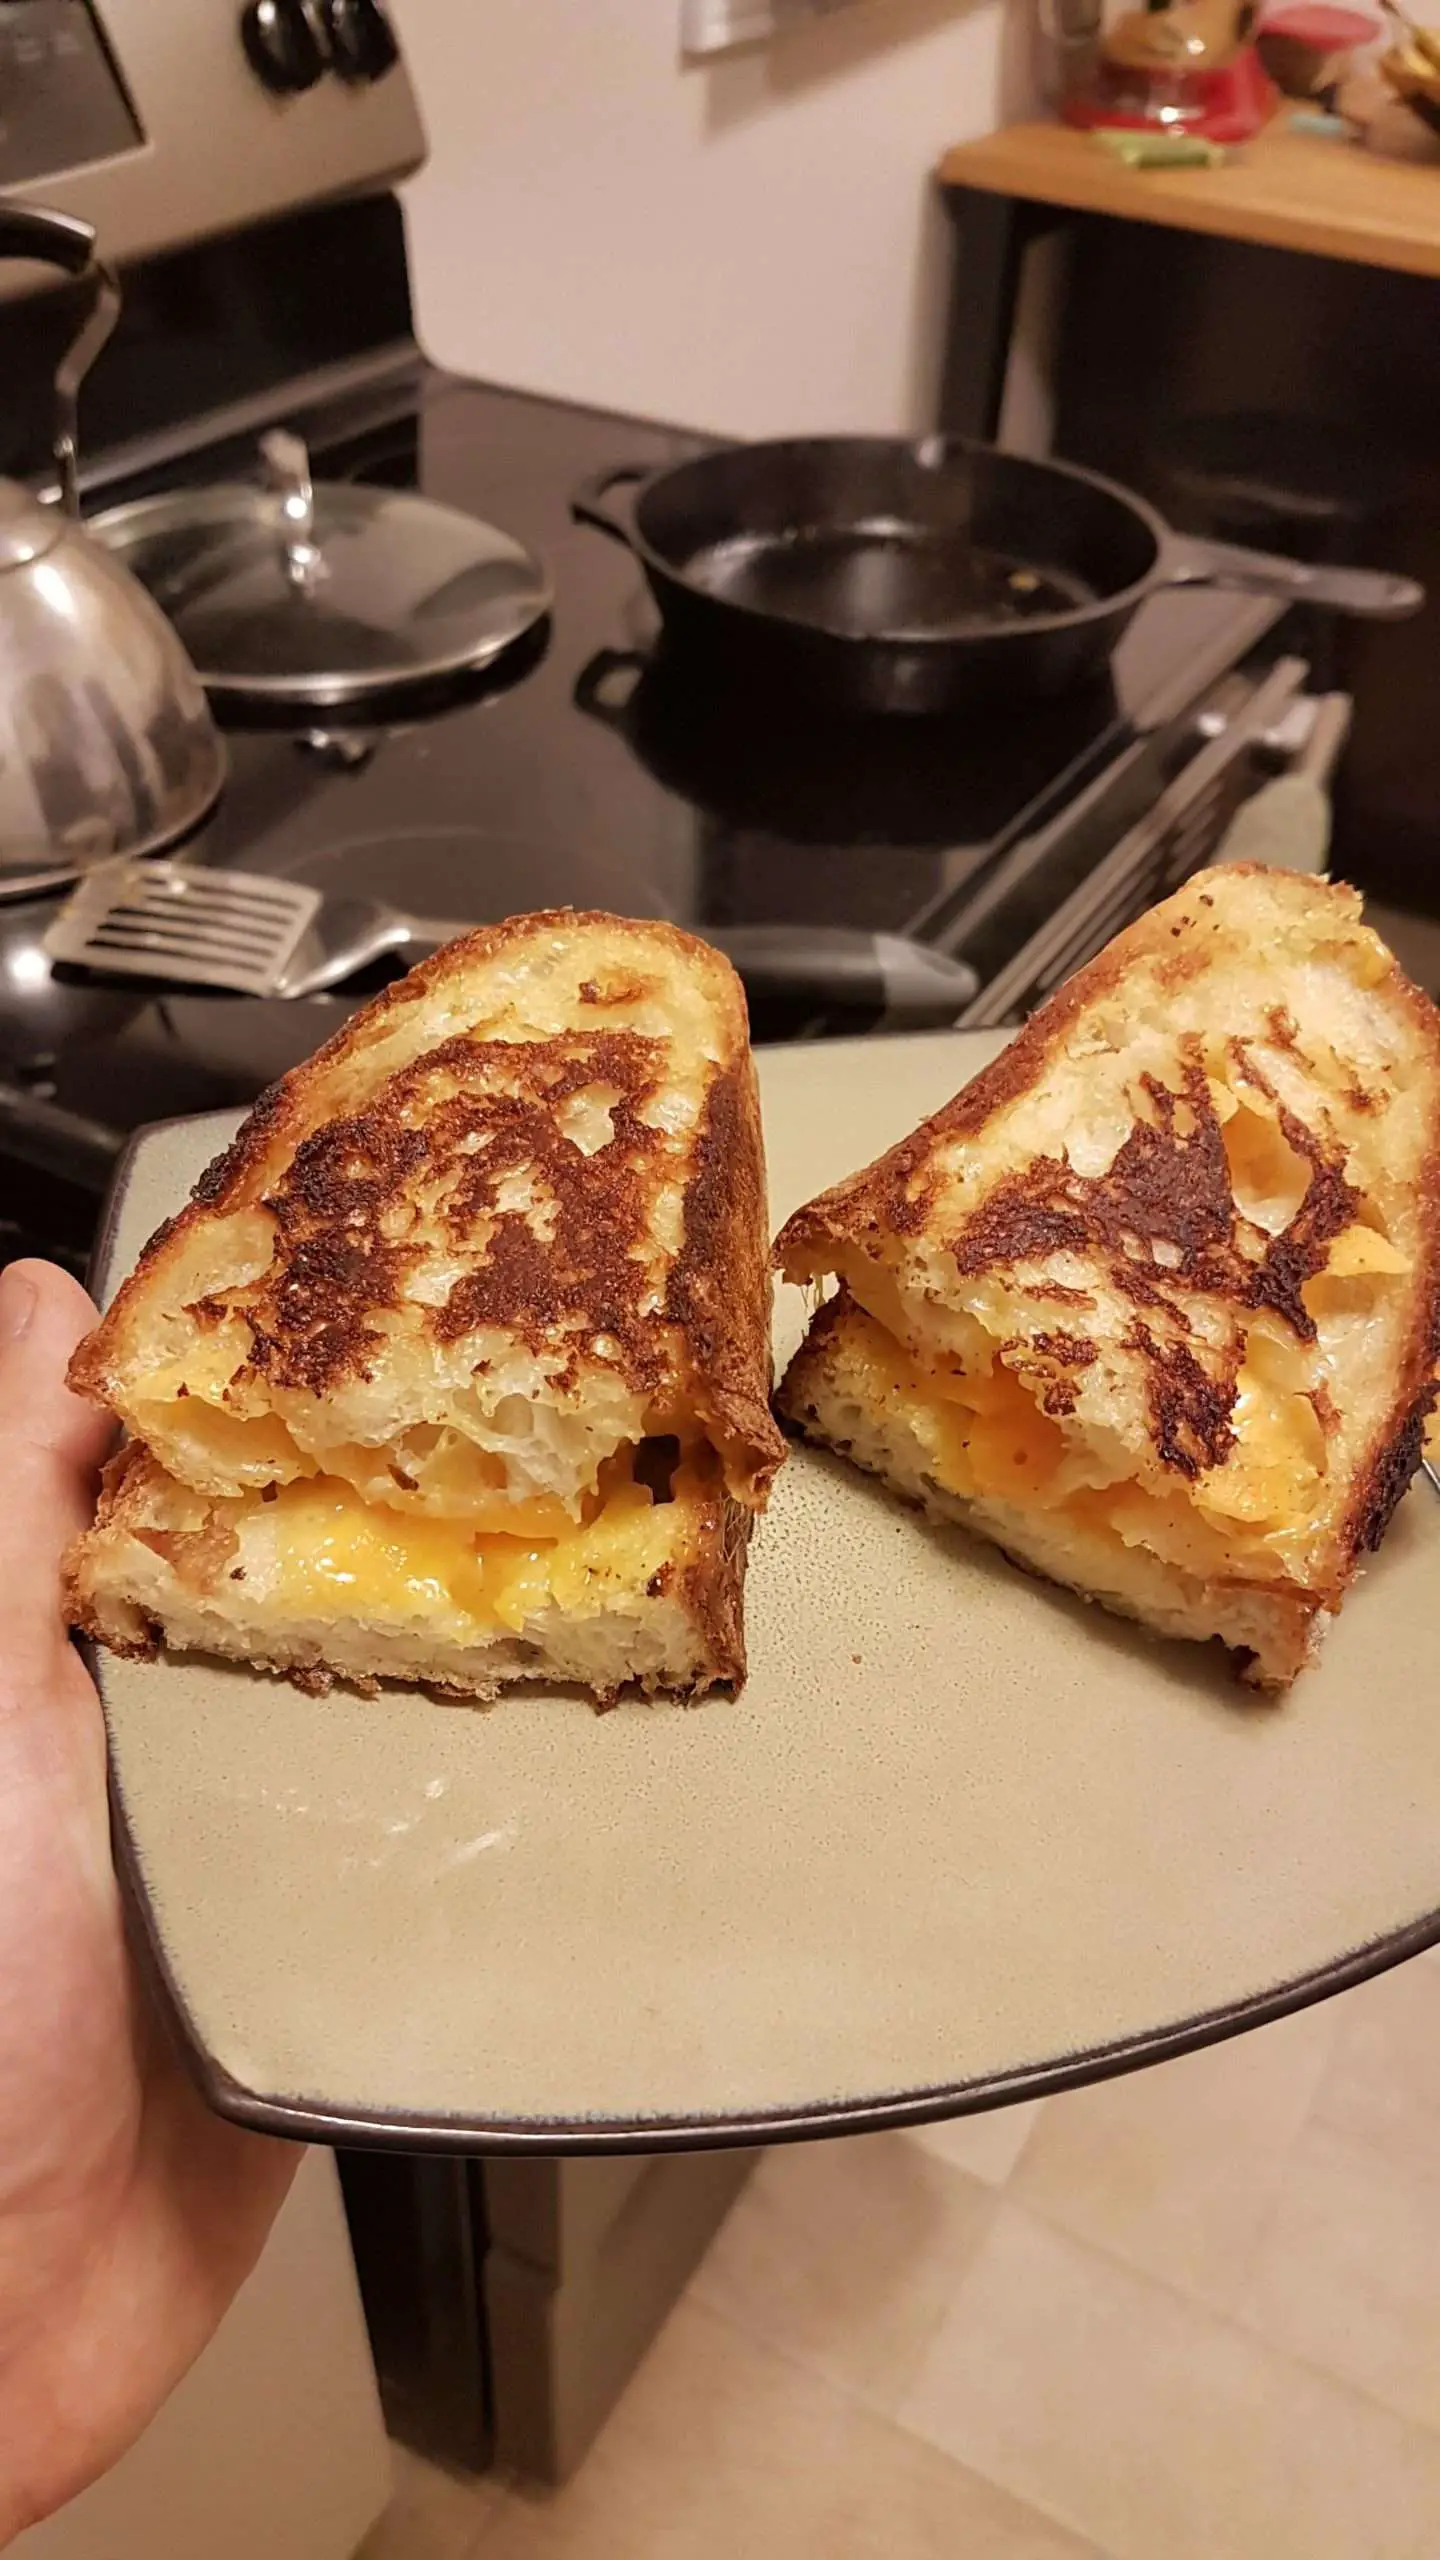 Grilled cheese using my homemade bread! : grilledcheese